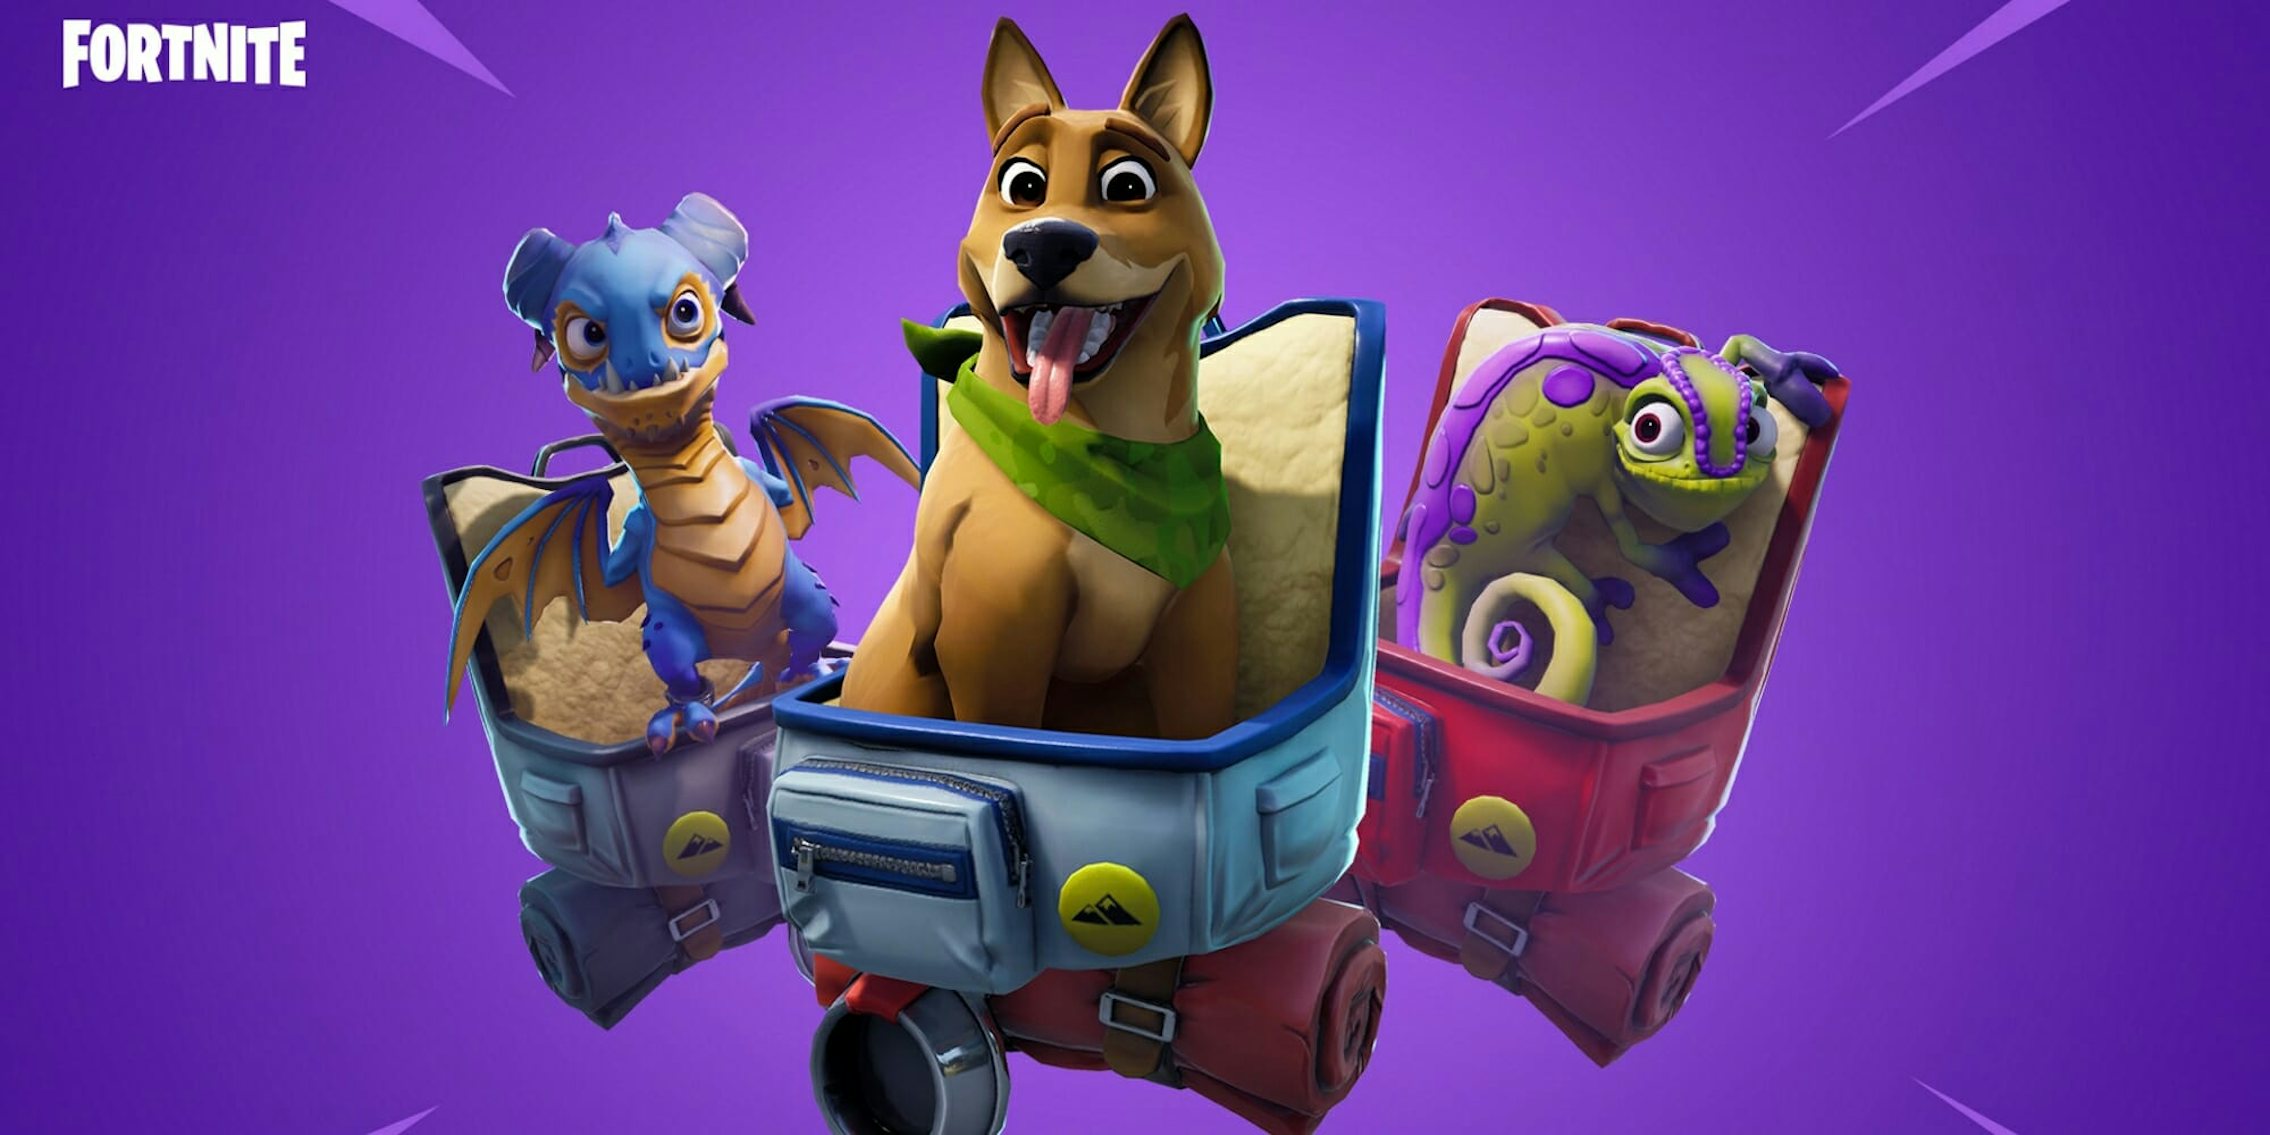 Fortnite now has pets, and here's how to unlock all seven of them.